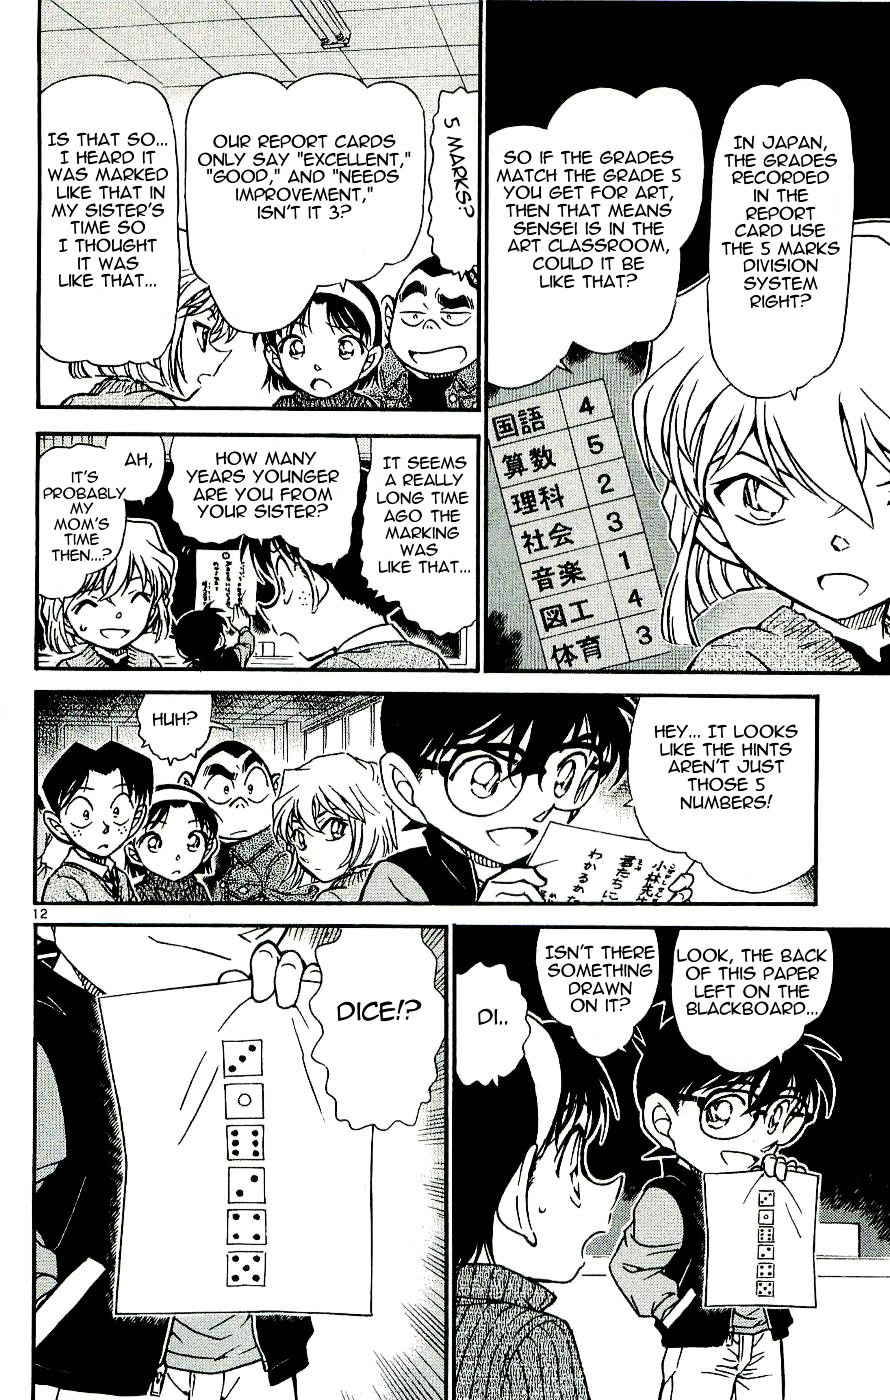 Detective Conan chapter 548 page 12